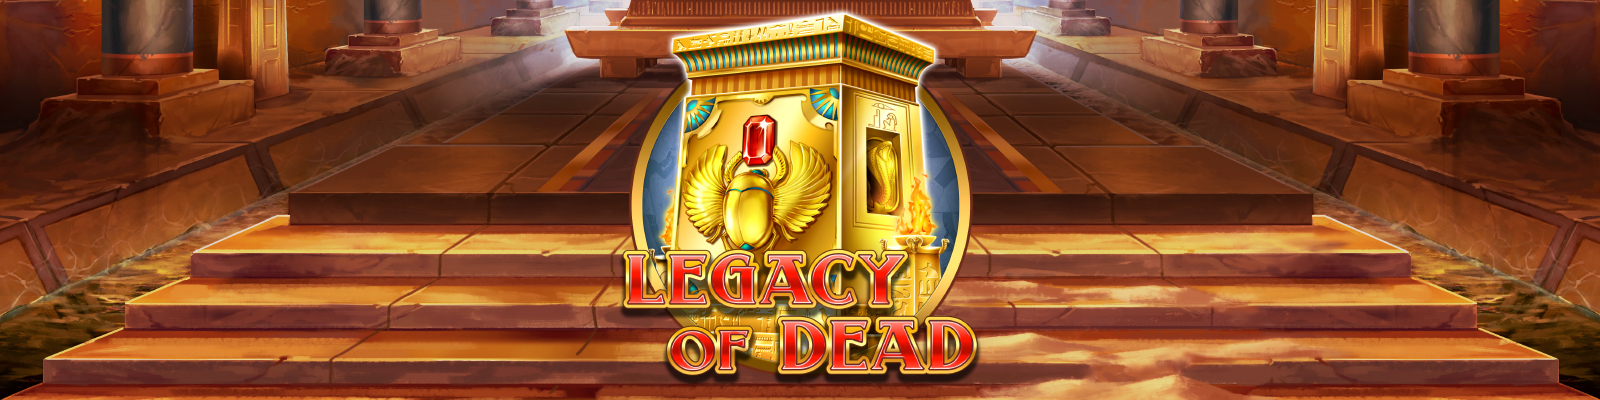 Legacy of Dead game